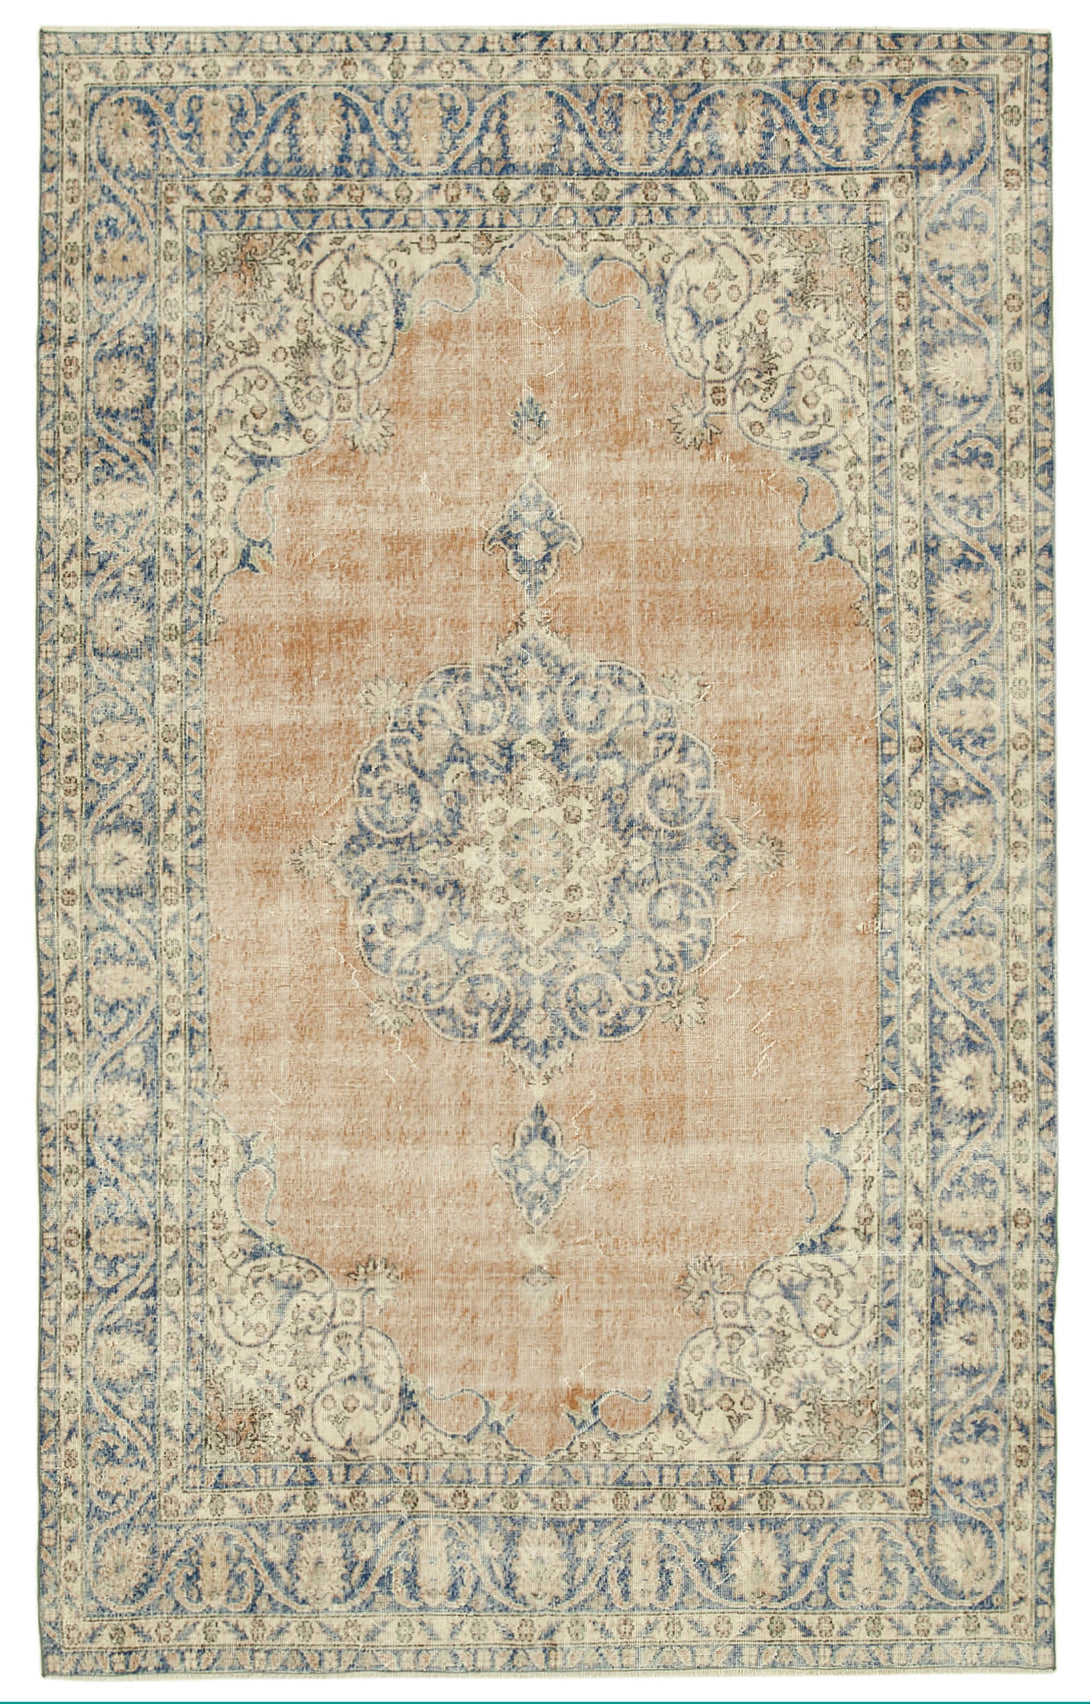 Handmade White Wash Area Rug > Design# OL-AC-38725 > Size: 6'-9" x 11'-2", Carpet Culture Rugs, Handmade Rugs, NYC Rugs, New Rugs, Shop Rugs, Rug Store, Outlet Rugs, SoHo Rugs, Rugs in USA